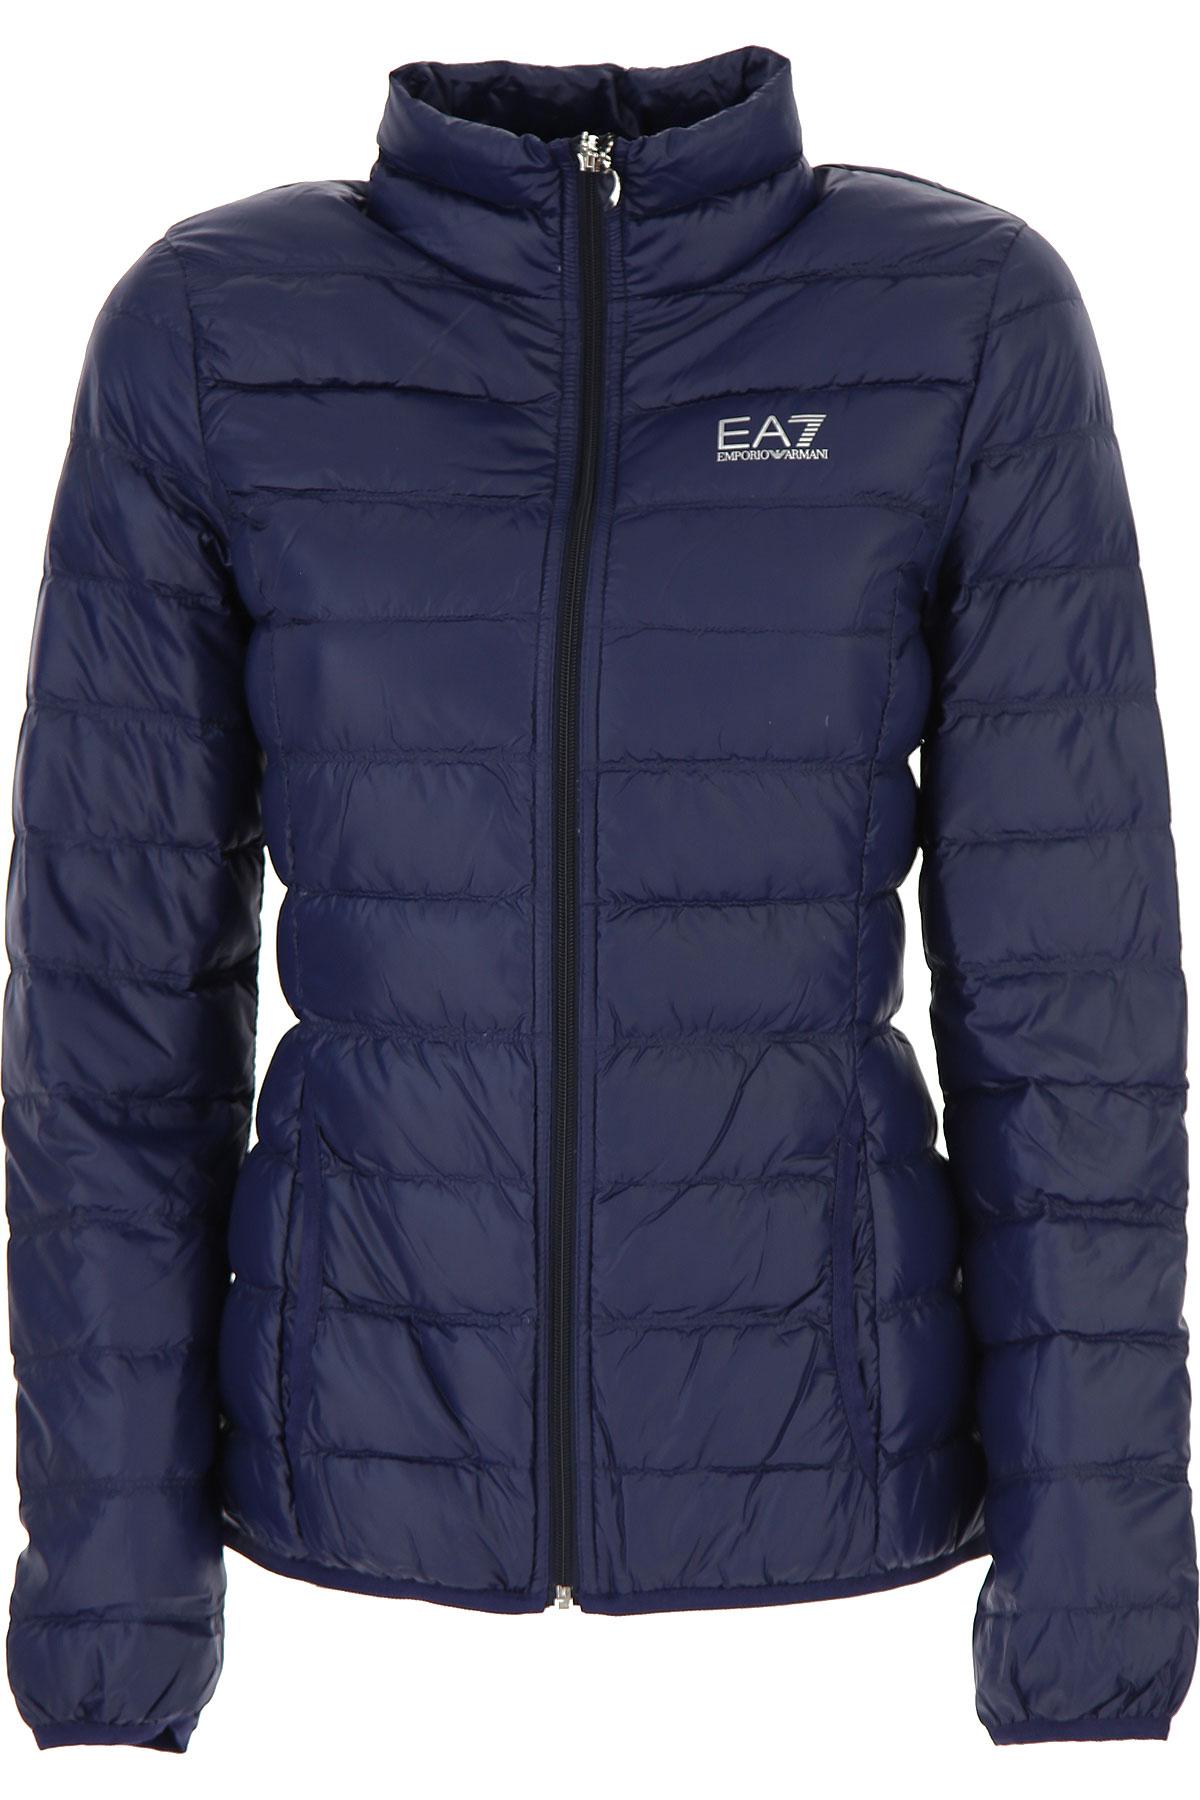 Emporio Armani Synthetic Down Jacket For Women in Blue Navy (Blue) - Lyst